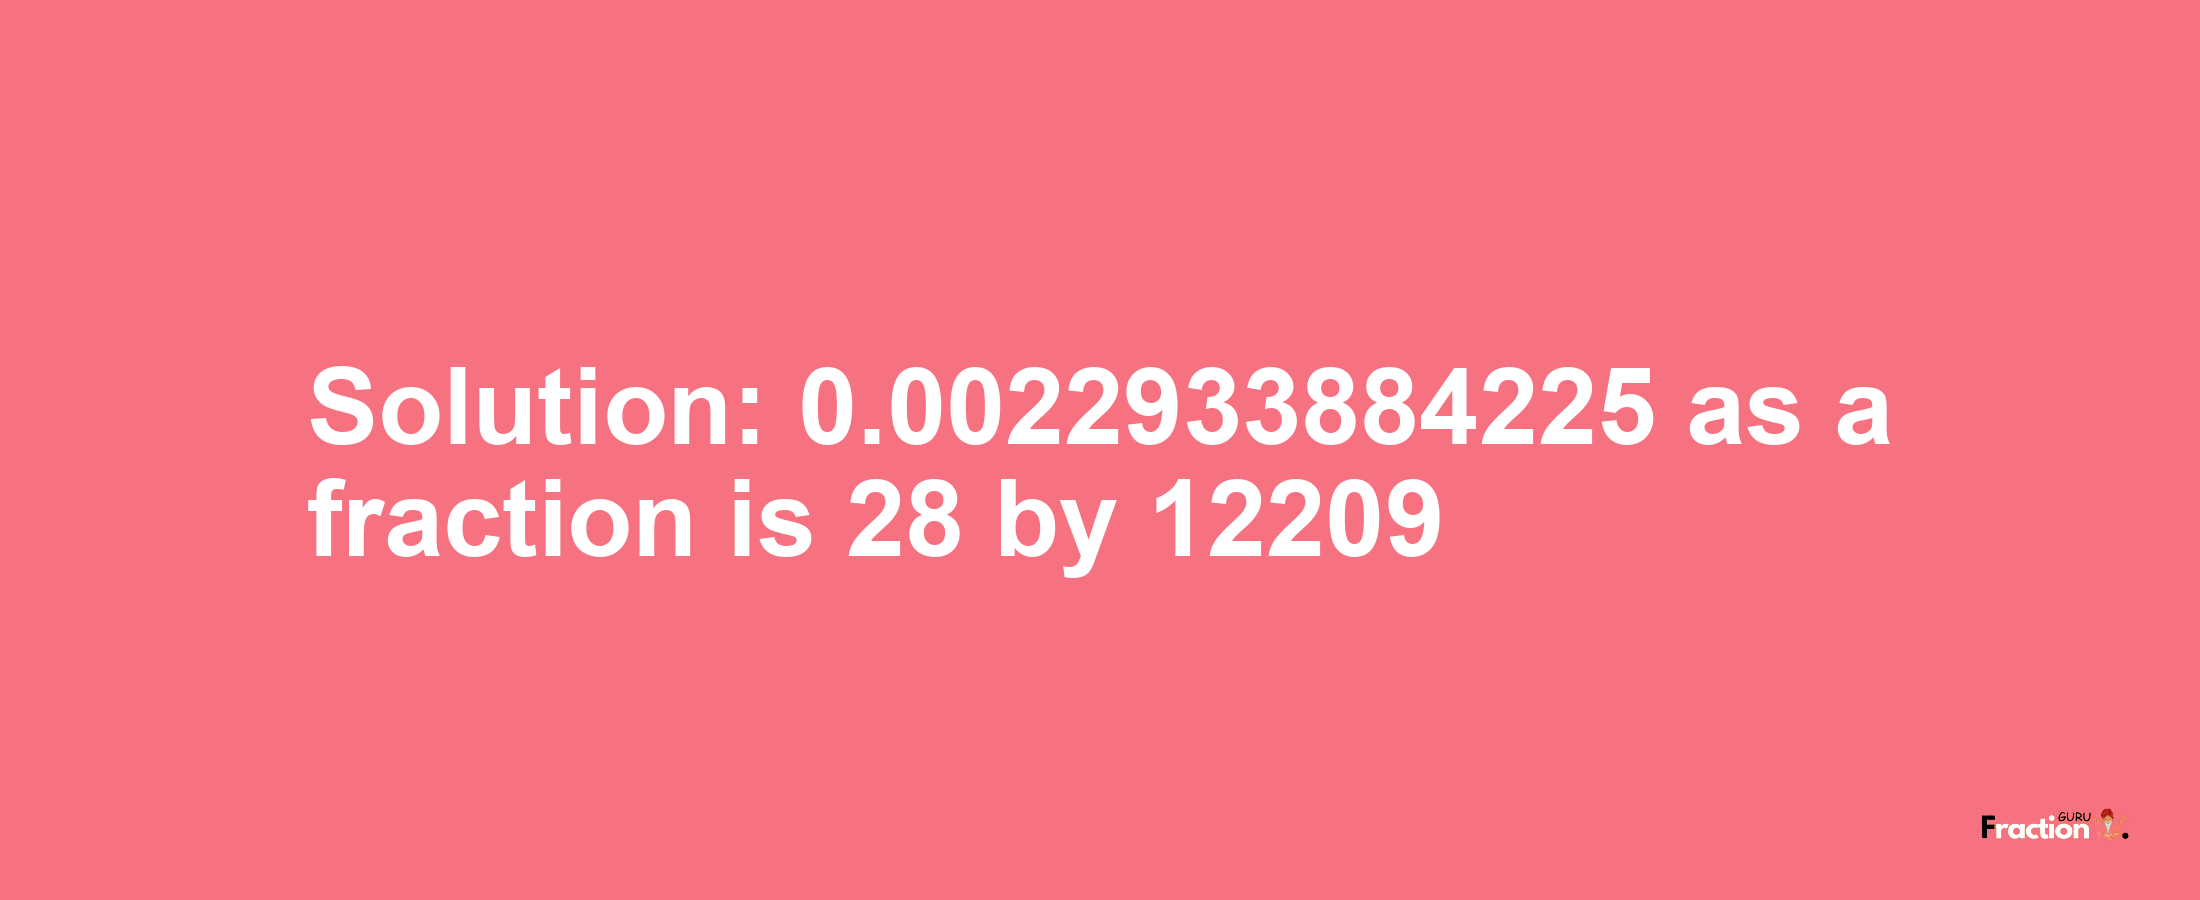 Solution:0.0022933884225 as a fraction is 28/12209